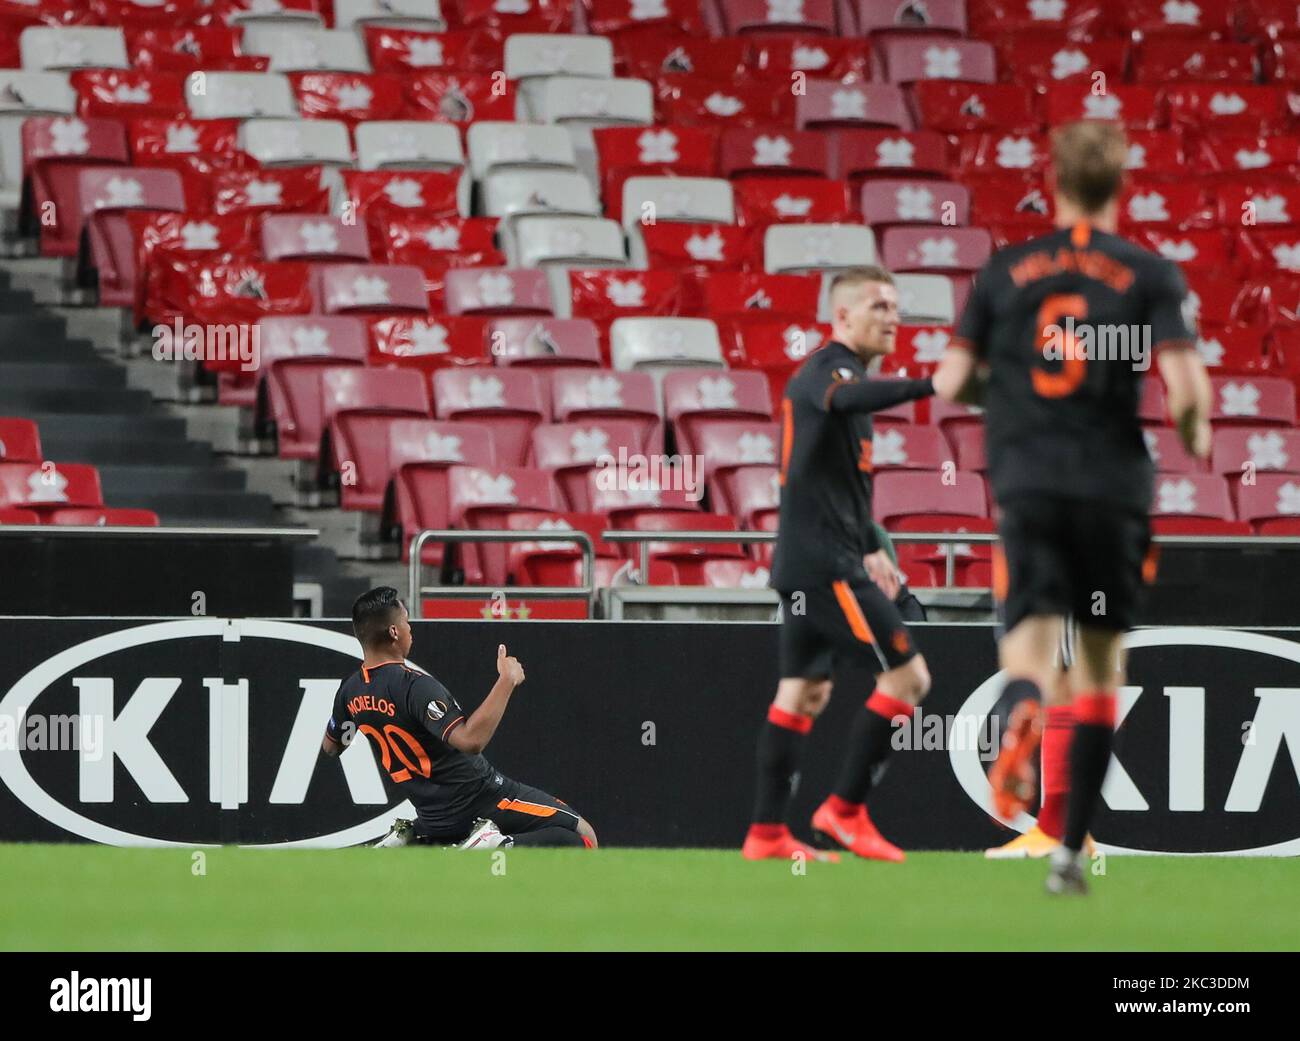 Alfredo Morelos of Rangers FC celebrates after scoring a goal during the UEFA Europa League Group D stage match between SL Benfica and Rangers FC at Estadio da Luz on November 5, 2020 in Lisbon, Portugal. (Photo by Paulo Nascimento/NurPhoto) Stock Photo